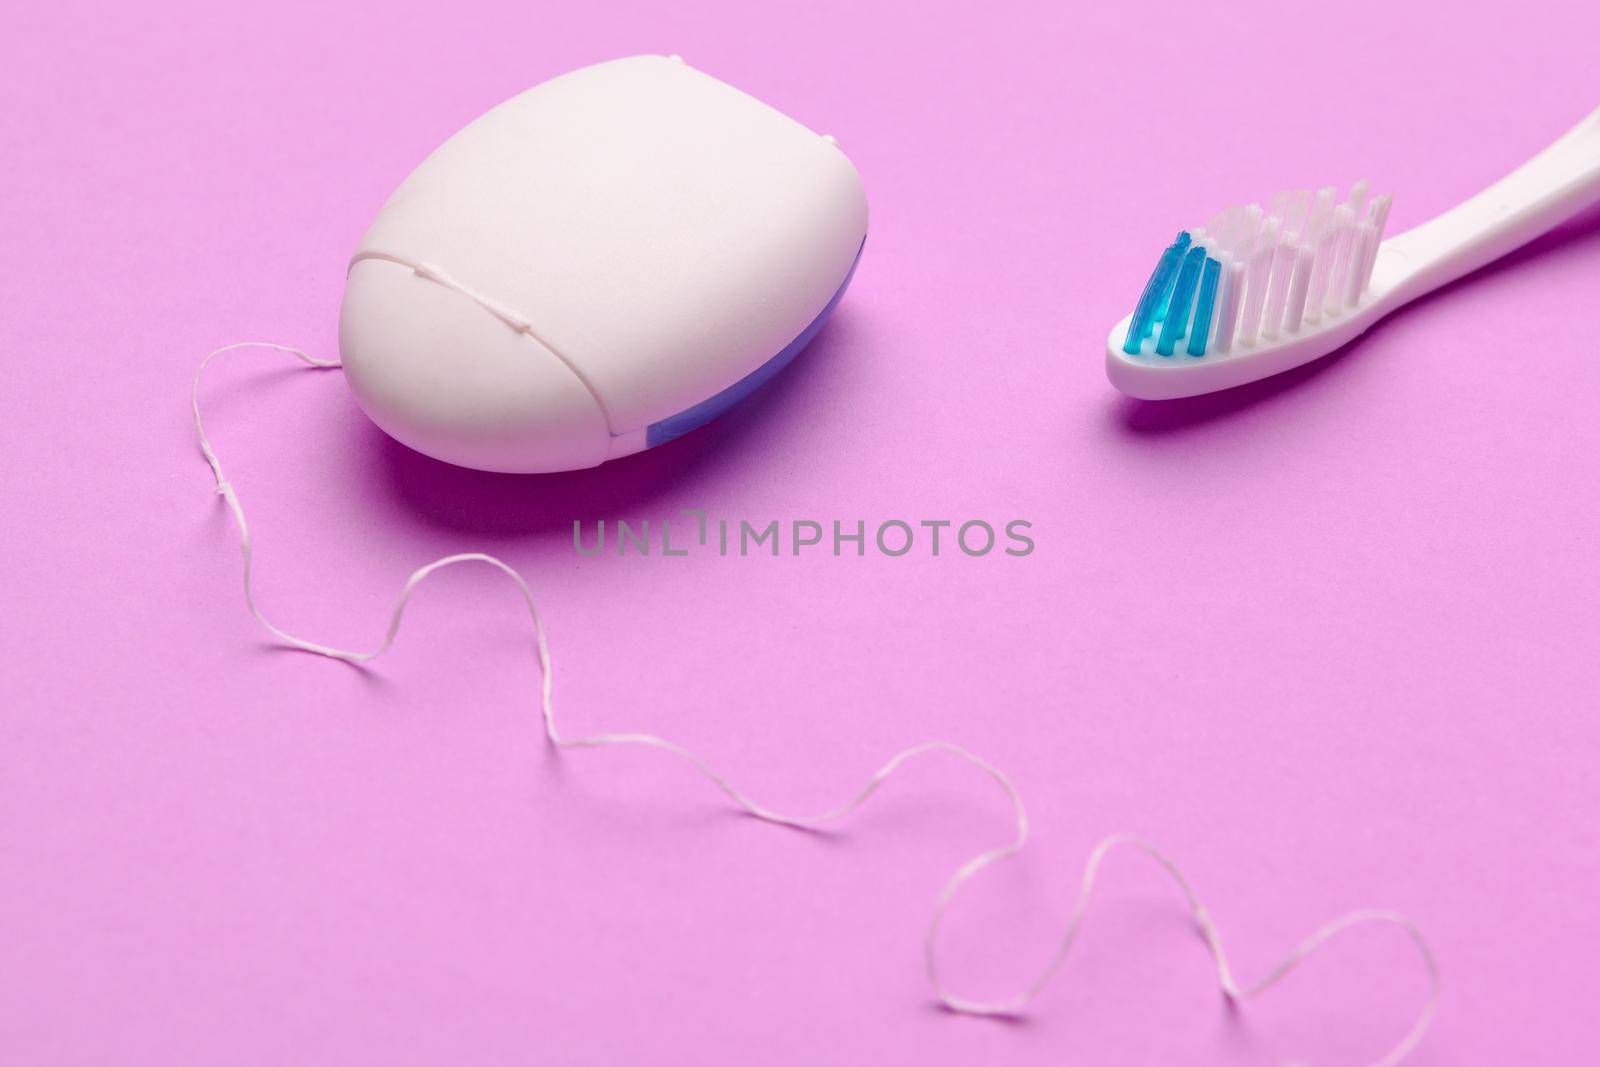 Taking care of teeth, dental concept on color background by Fabrikasimf